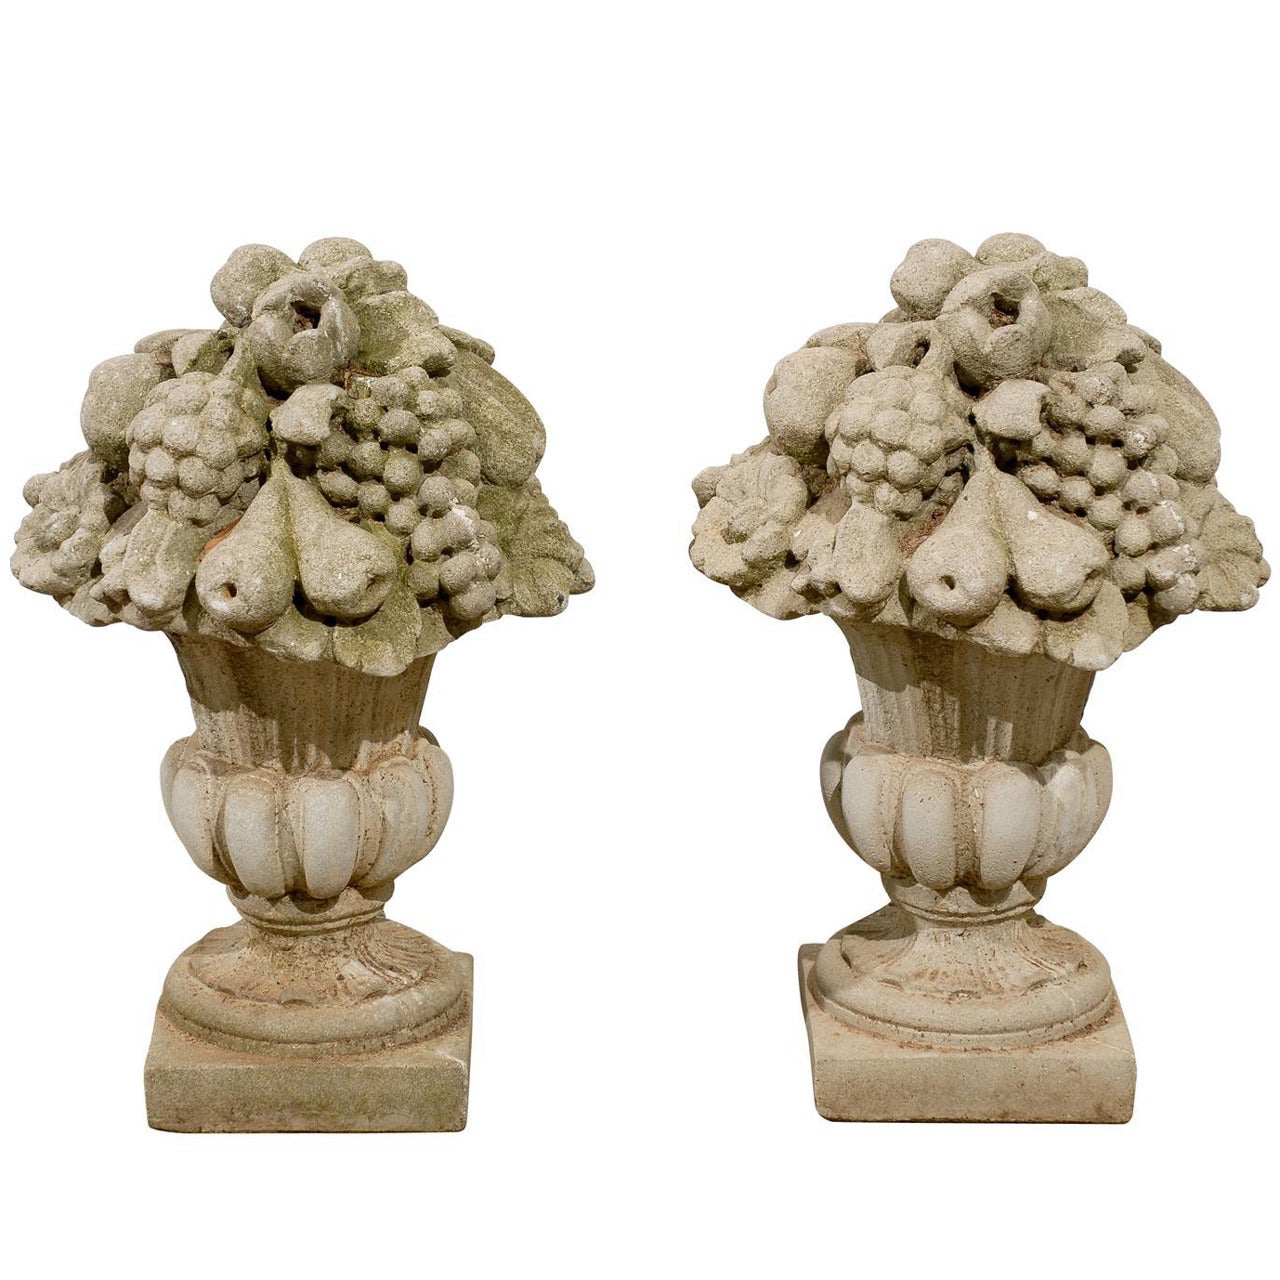 Pair of Fruit Baskets on Pedestals in Stone